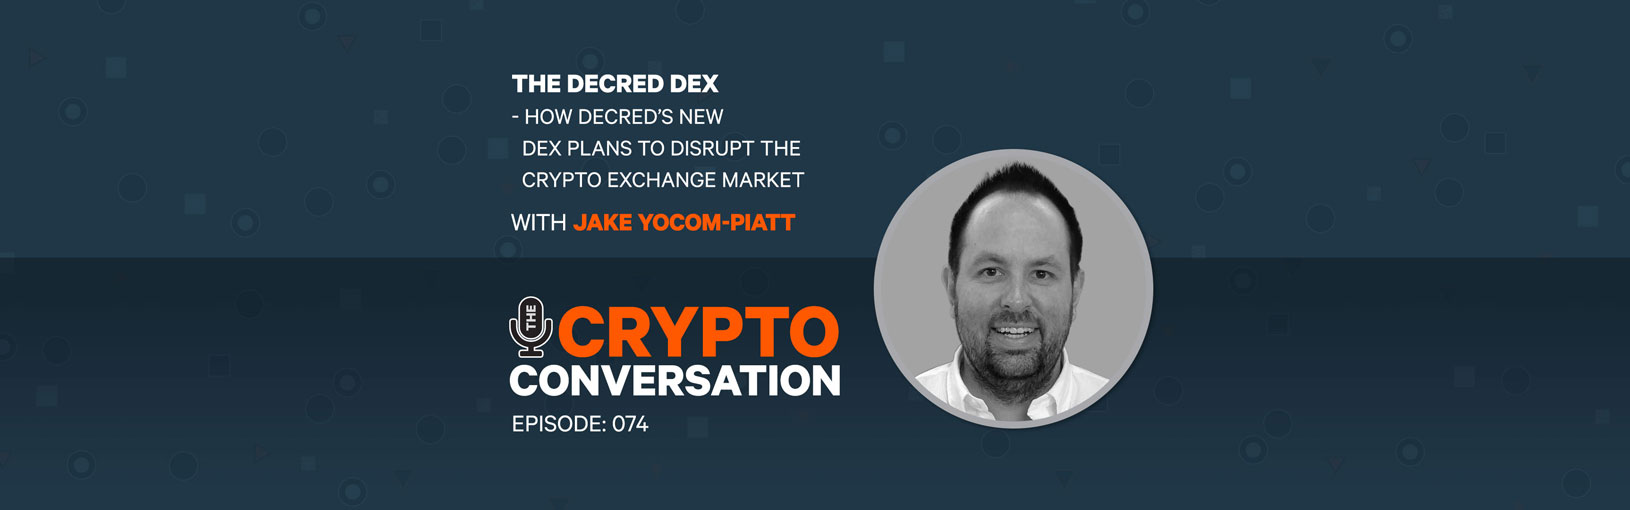 How the Decred Dex plans to disrupt the crypto exchange market